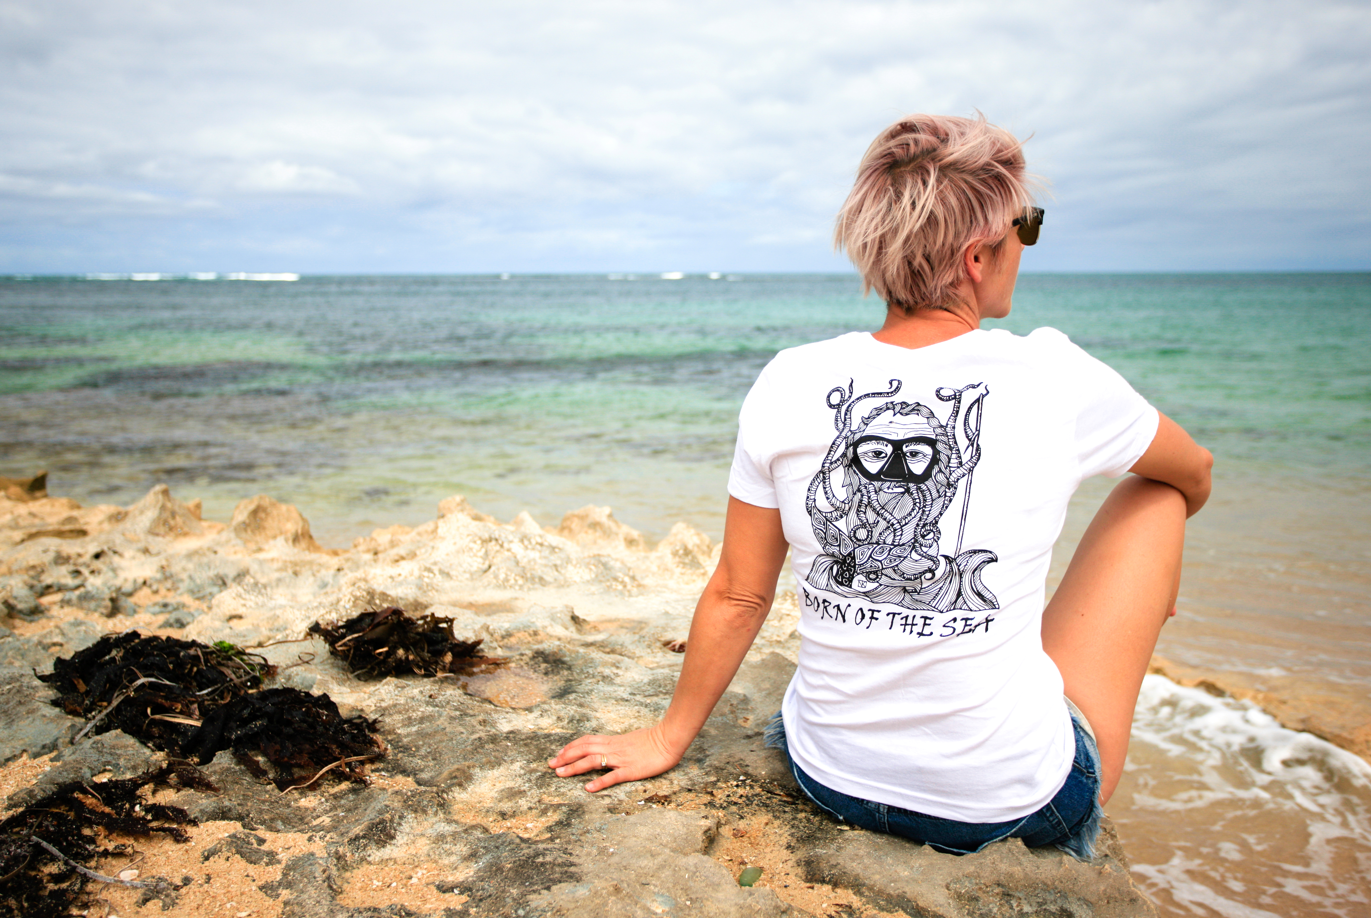 BORN OF THE SEA T-SHIRT | Woman's